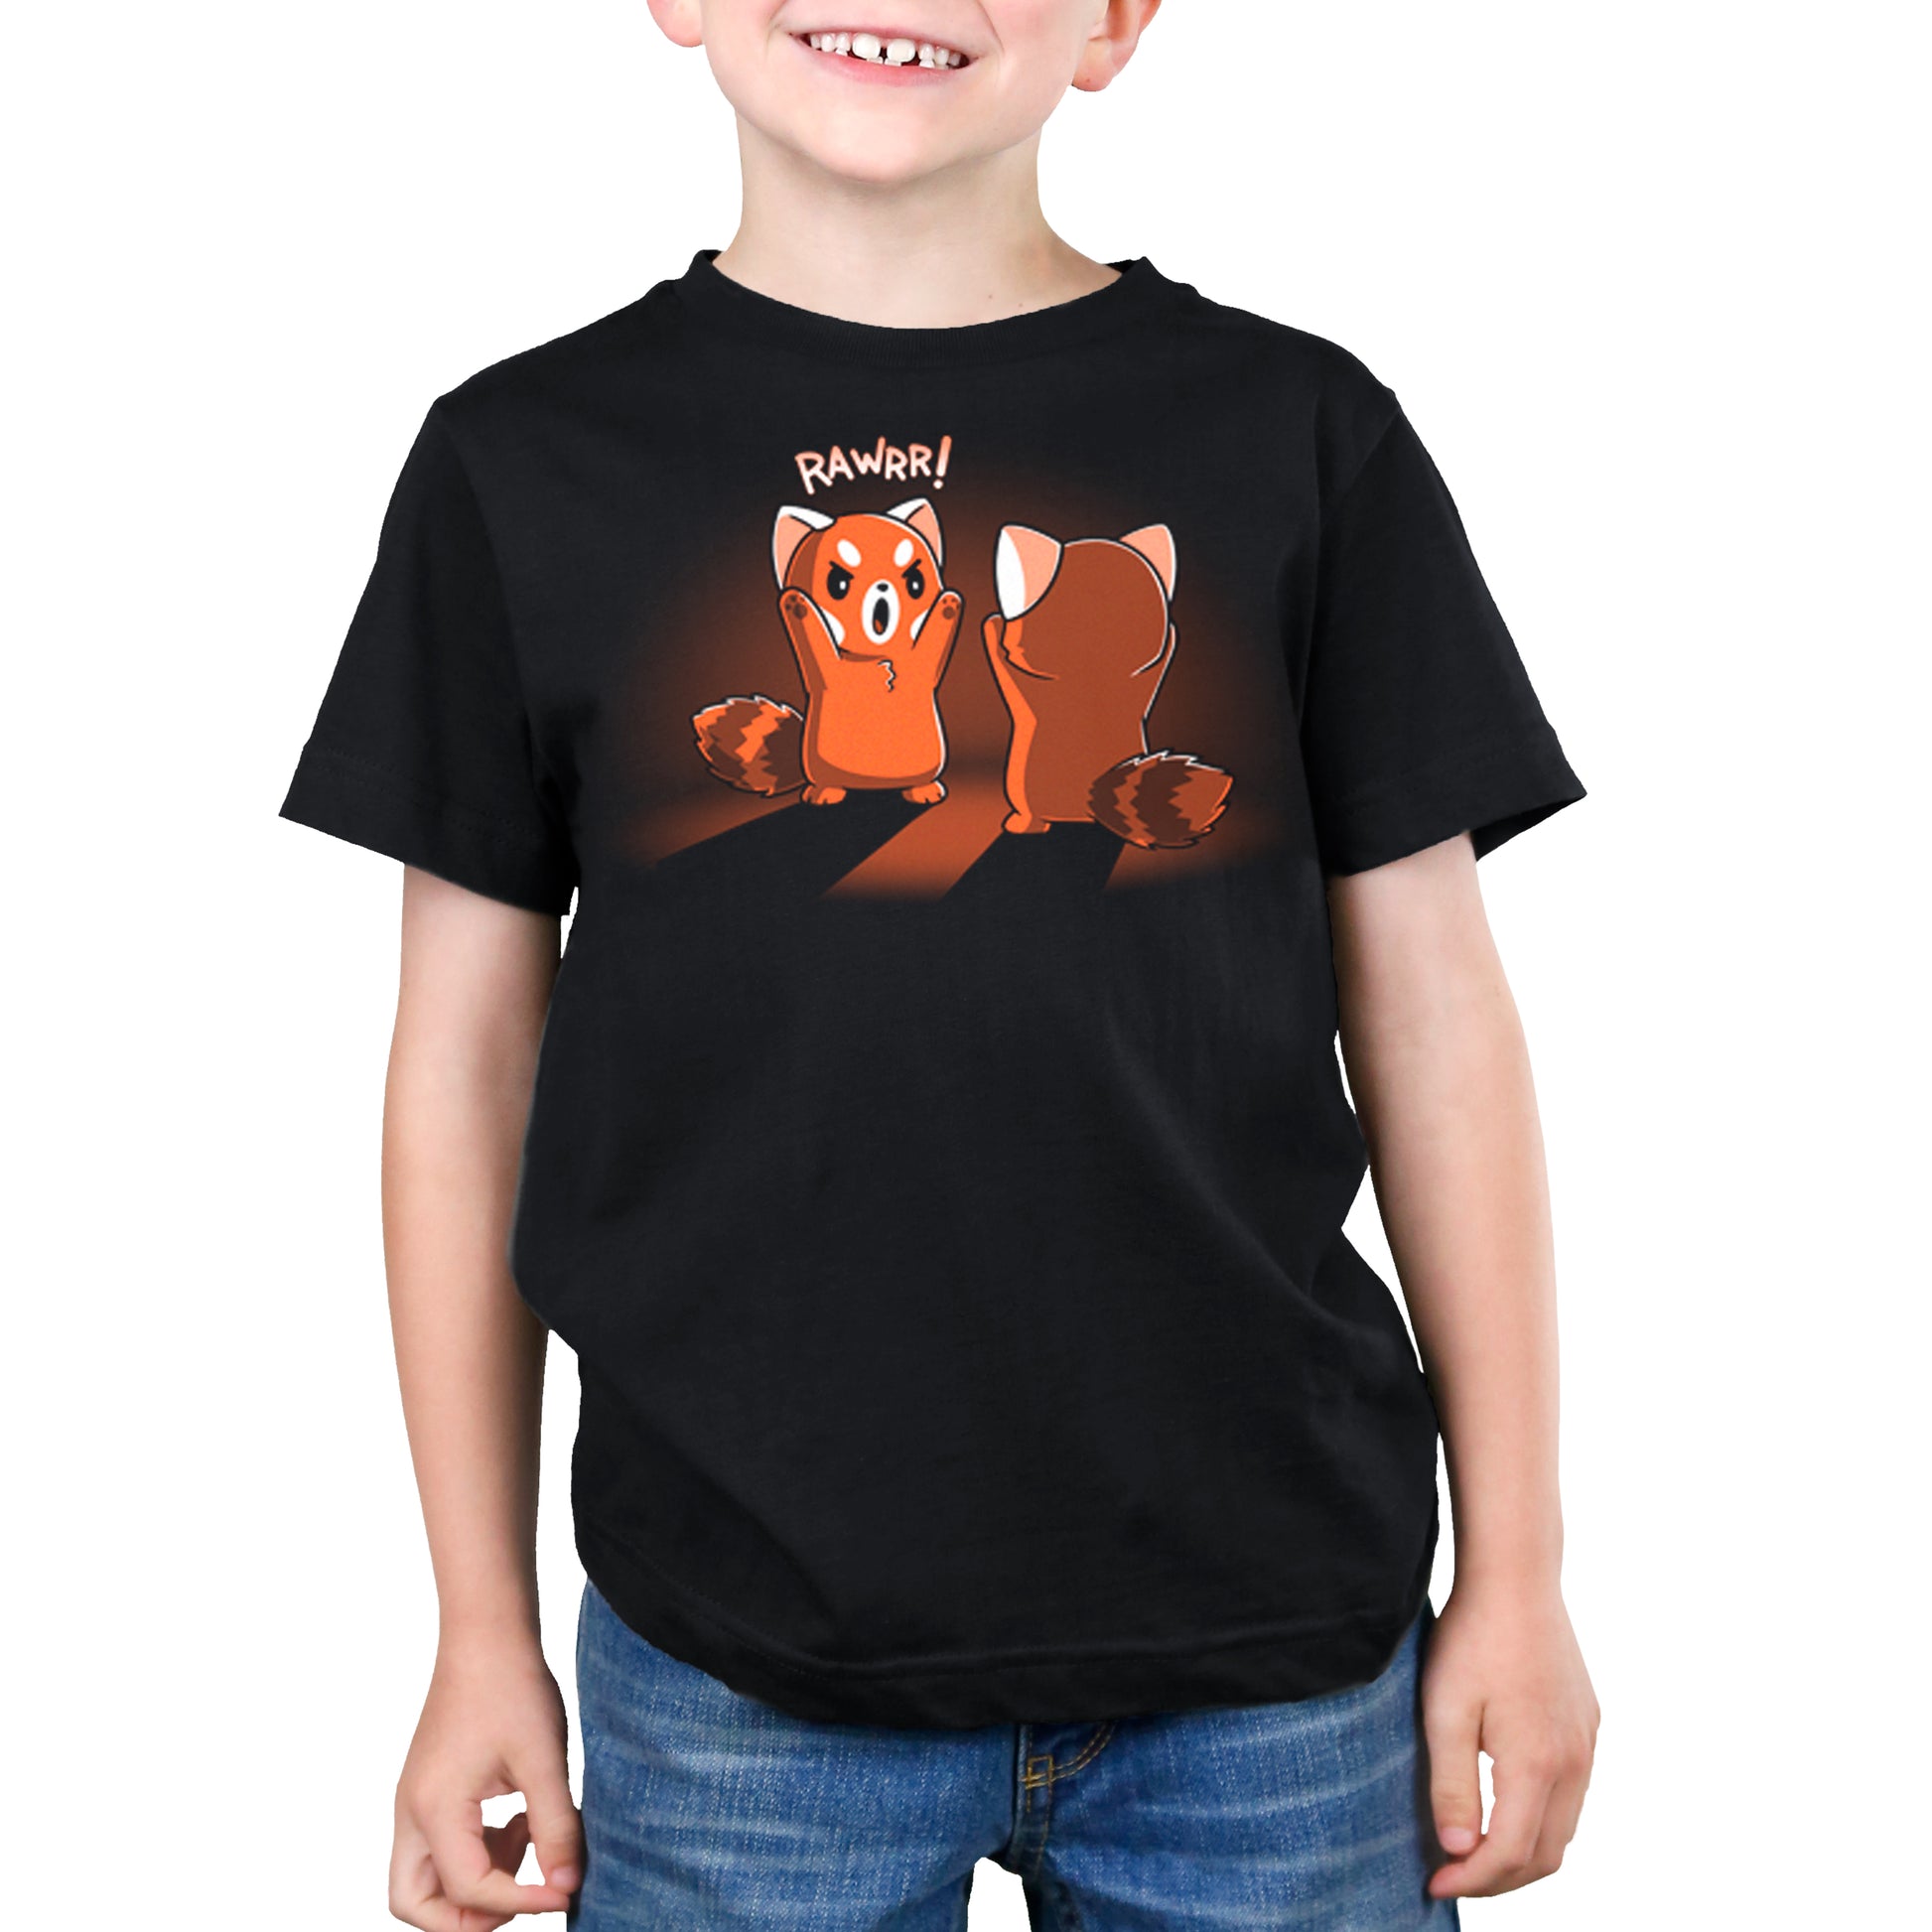 A young boy wearing a TeeTurtle t-shirt with two raccoons on it, showcasing the ferocity of their Rawrr!